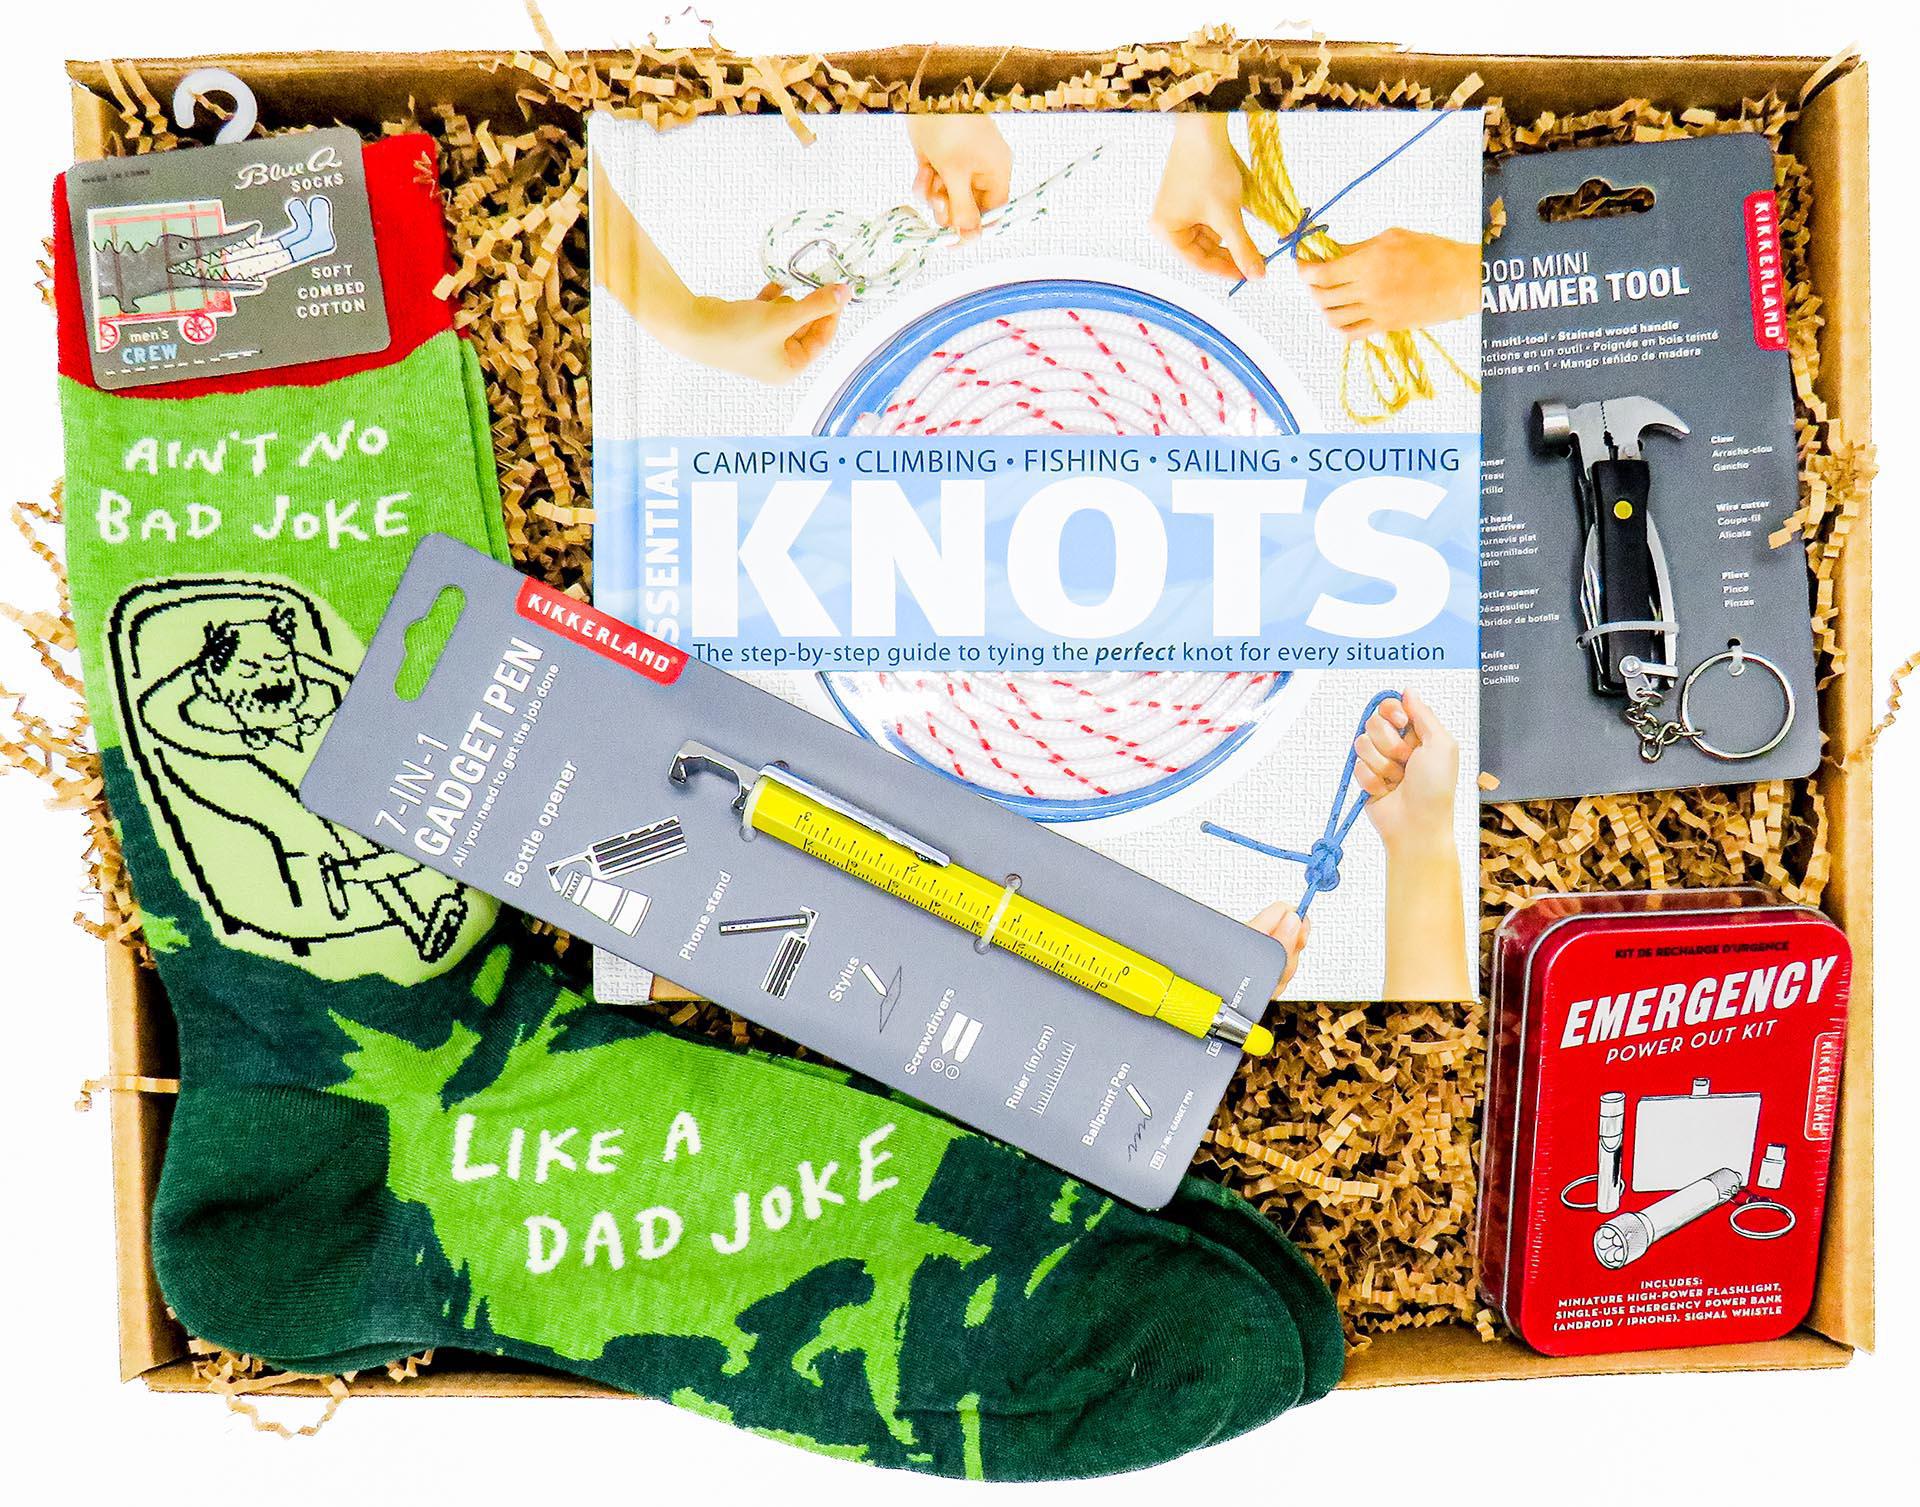 very cool gift box that has a Gadget Pen, Mini Hammer Tool Kit,  "No Joke Like a Dad Joke" Pair of socks ", Essential Knots" Book and Emergency Power Out kit